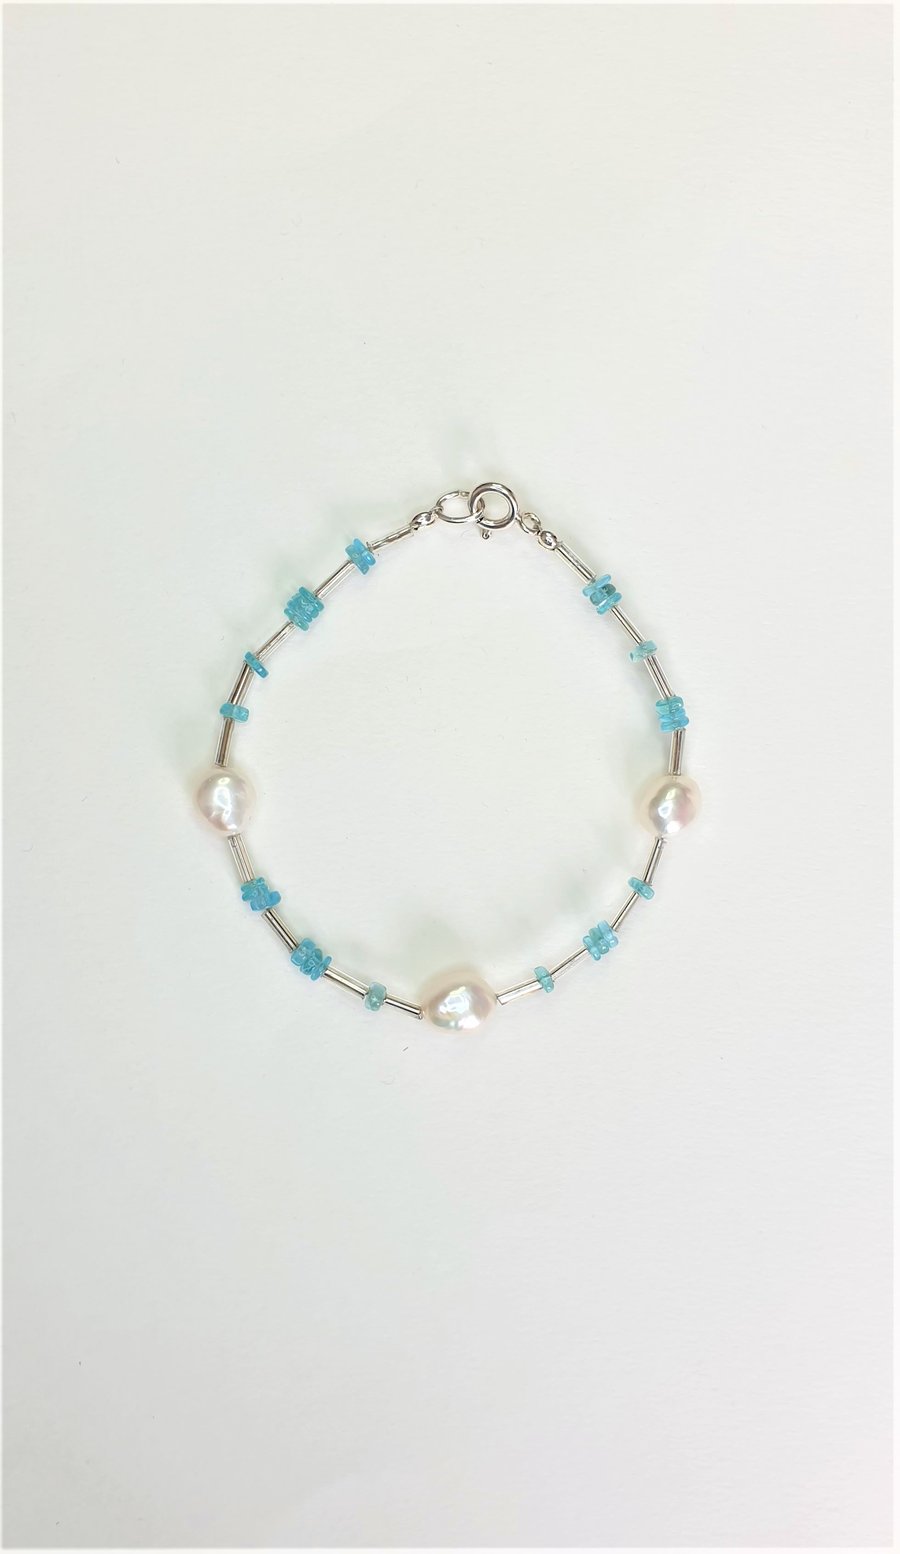 Sky Blue Apatite Bracelet With Sterling Silver And Freshwater Pearls